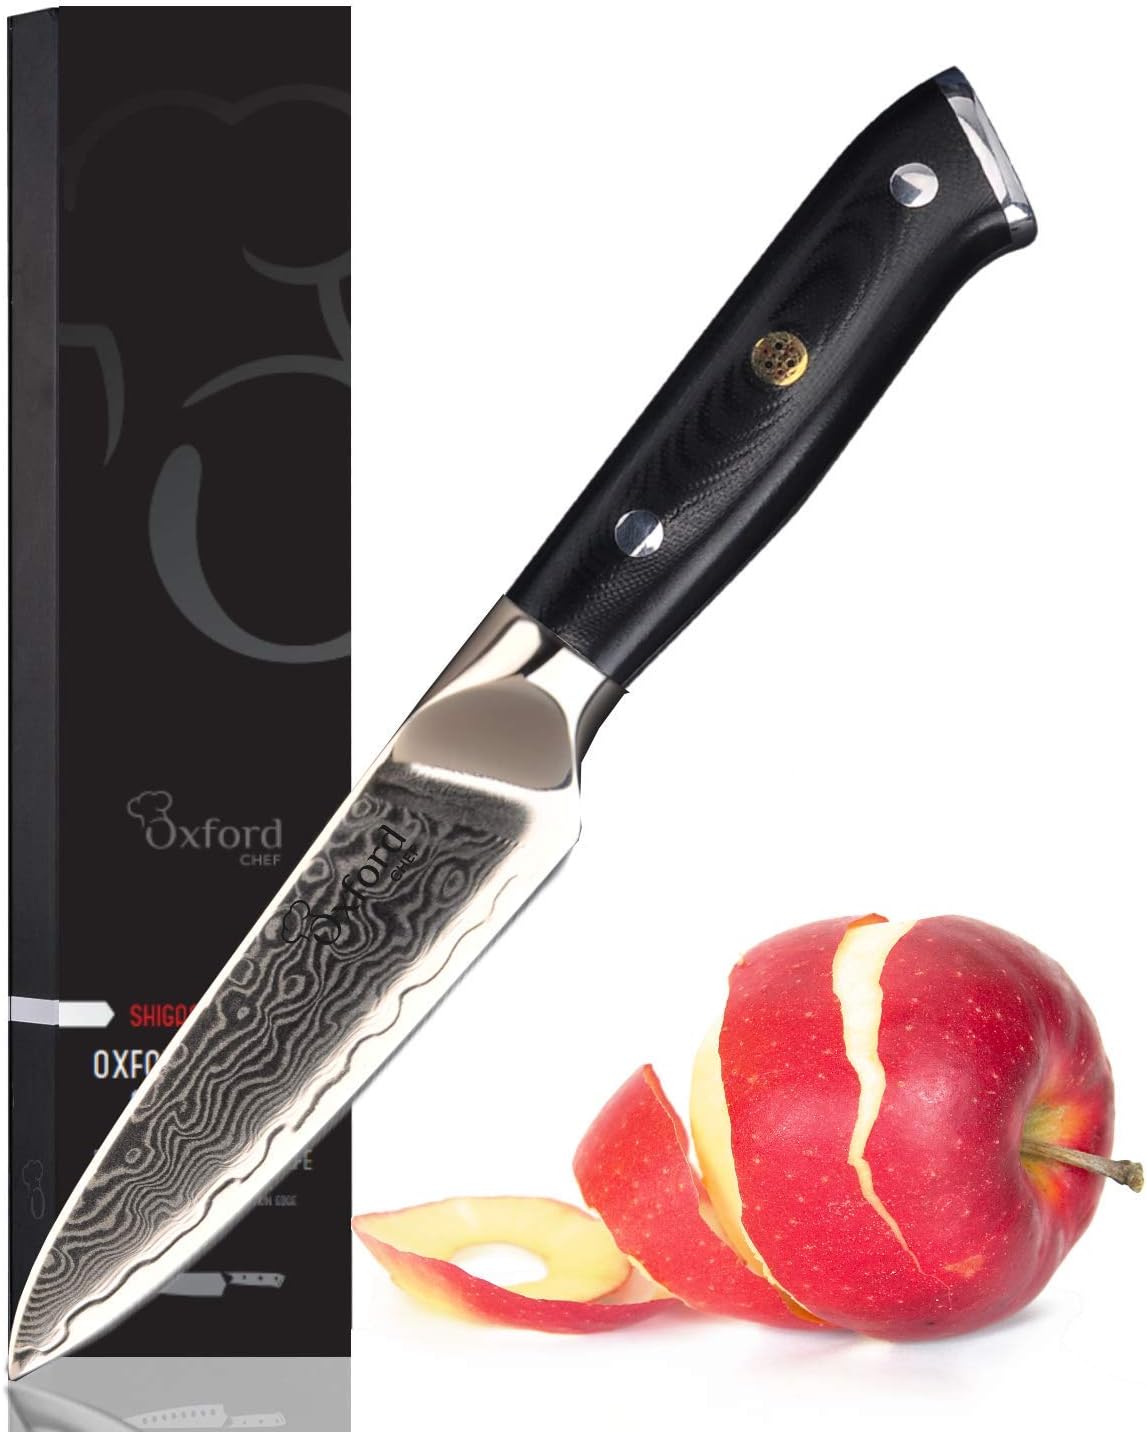 KD Japanese 67 Layer Damascus VG10 Steel Kitchen Chef's Knife